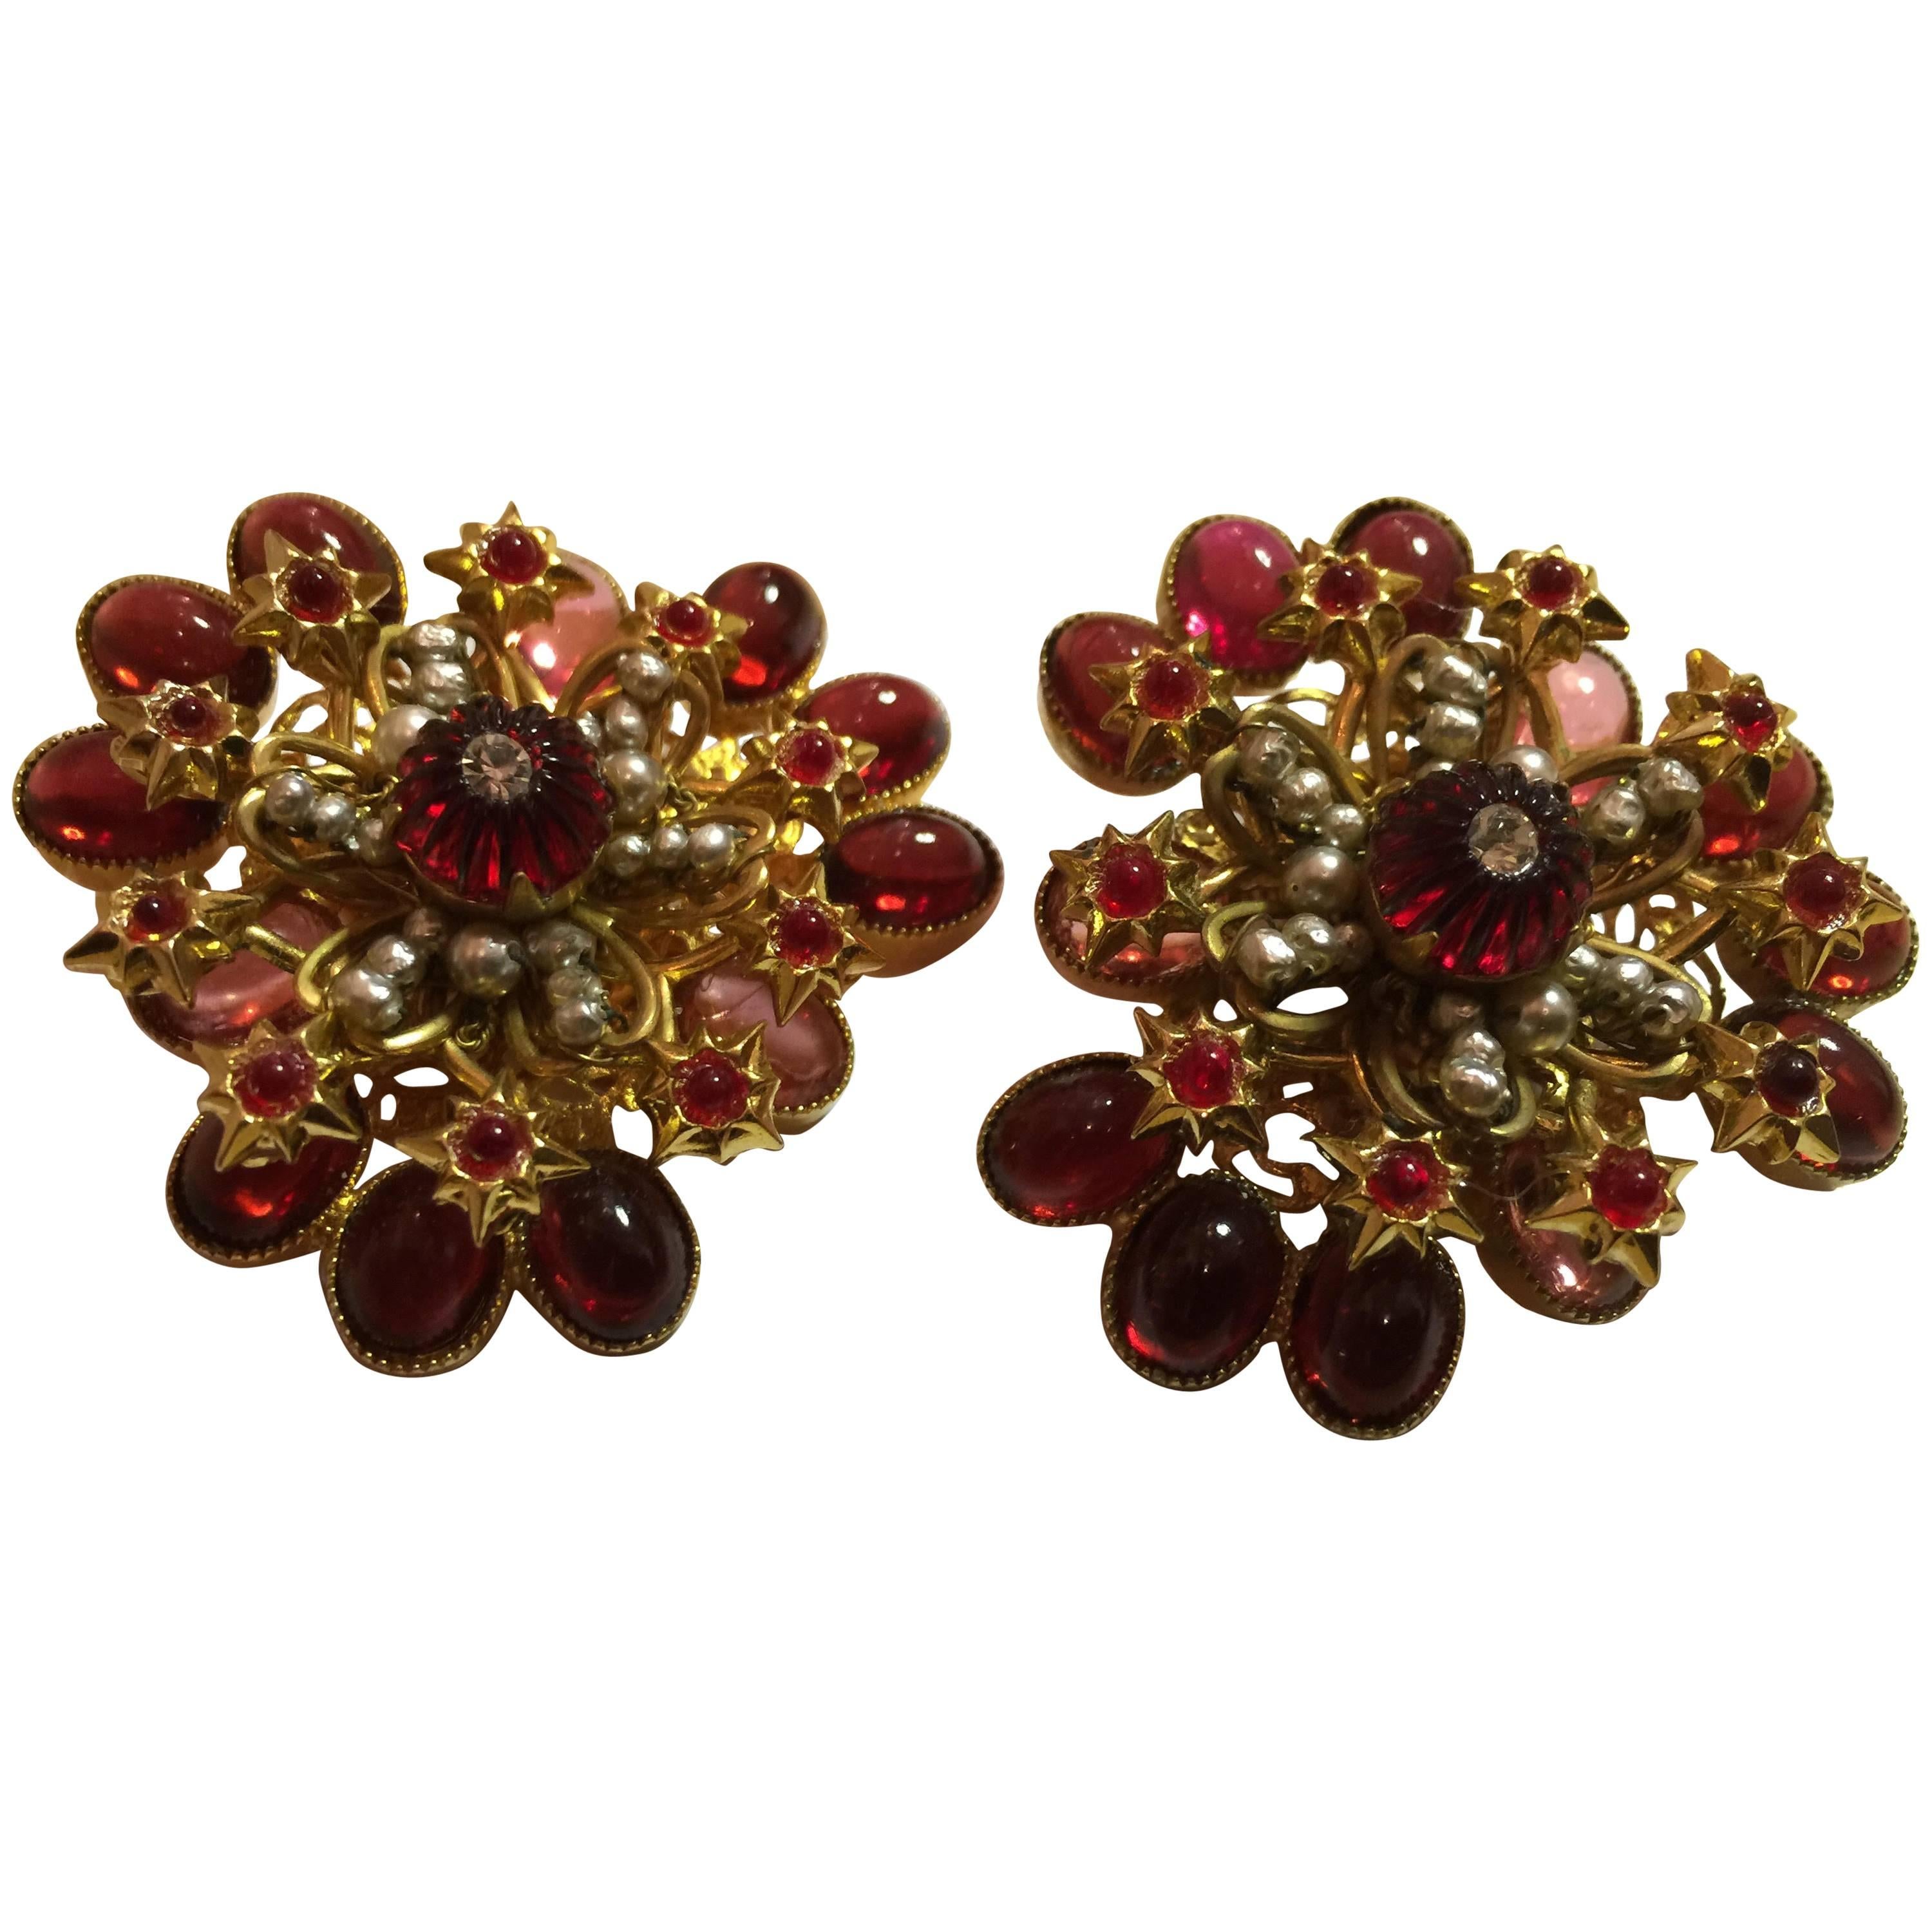 DeLillo Melon Bead Pearl and Cabochon Faux Ruby Clip Back Earrings For Sale